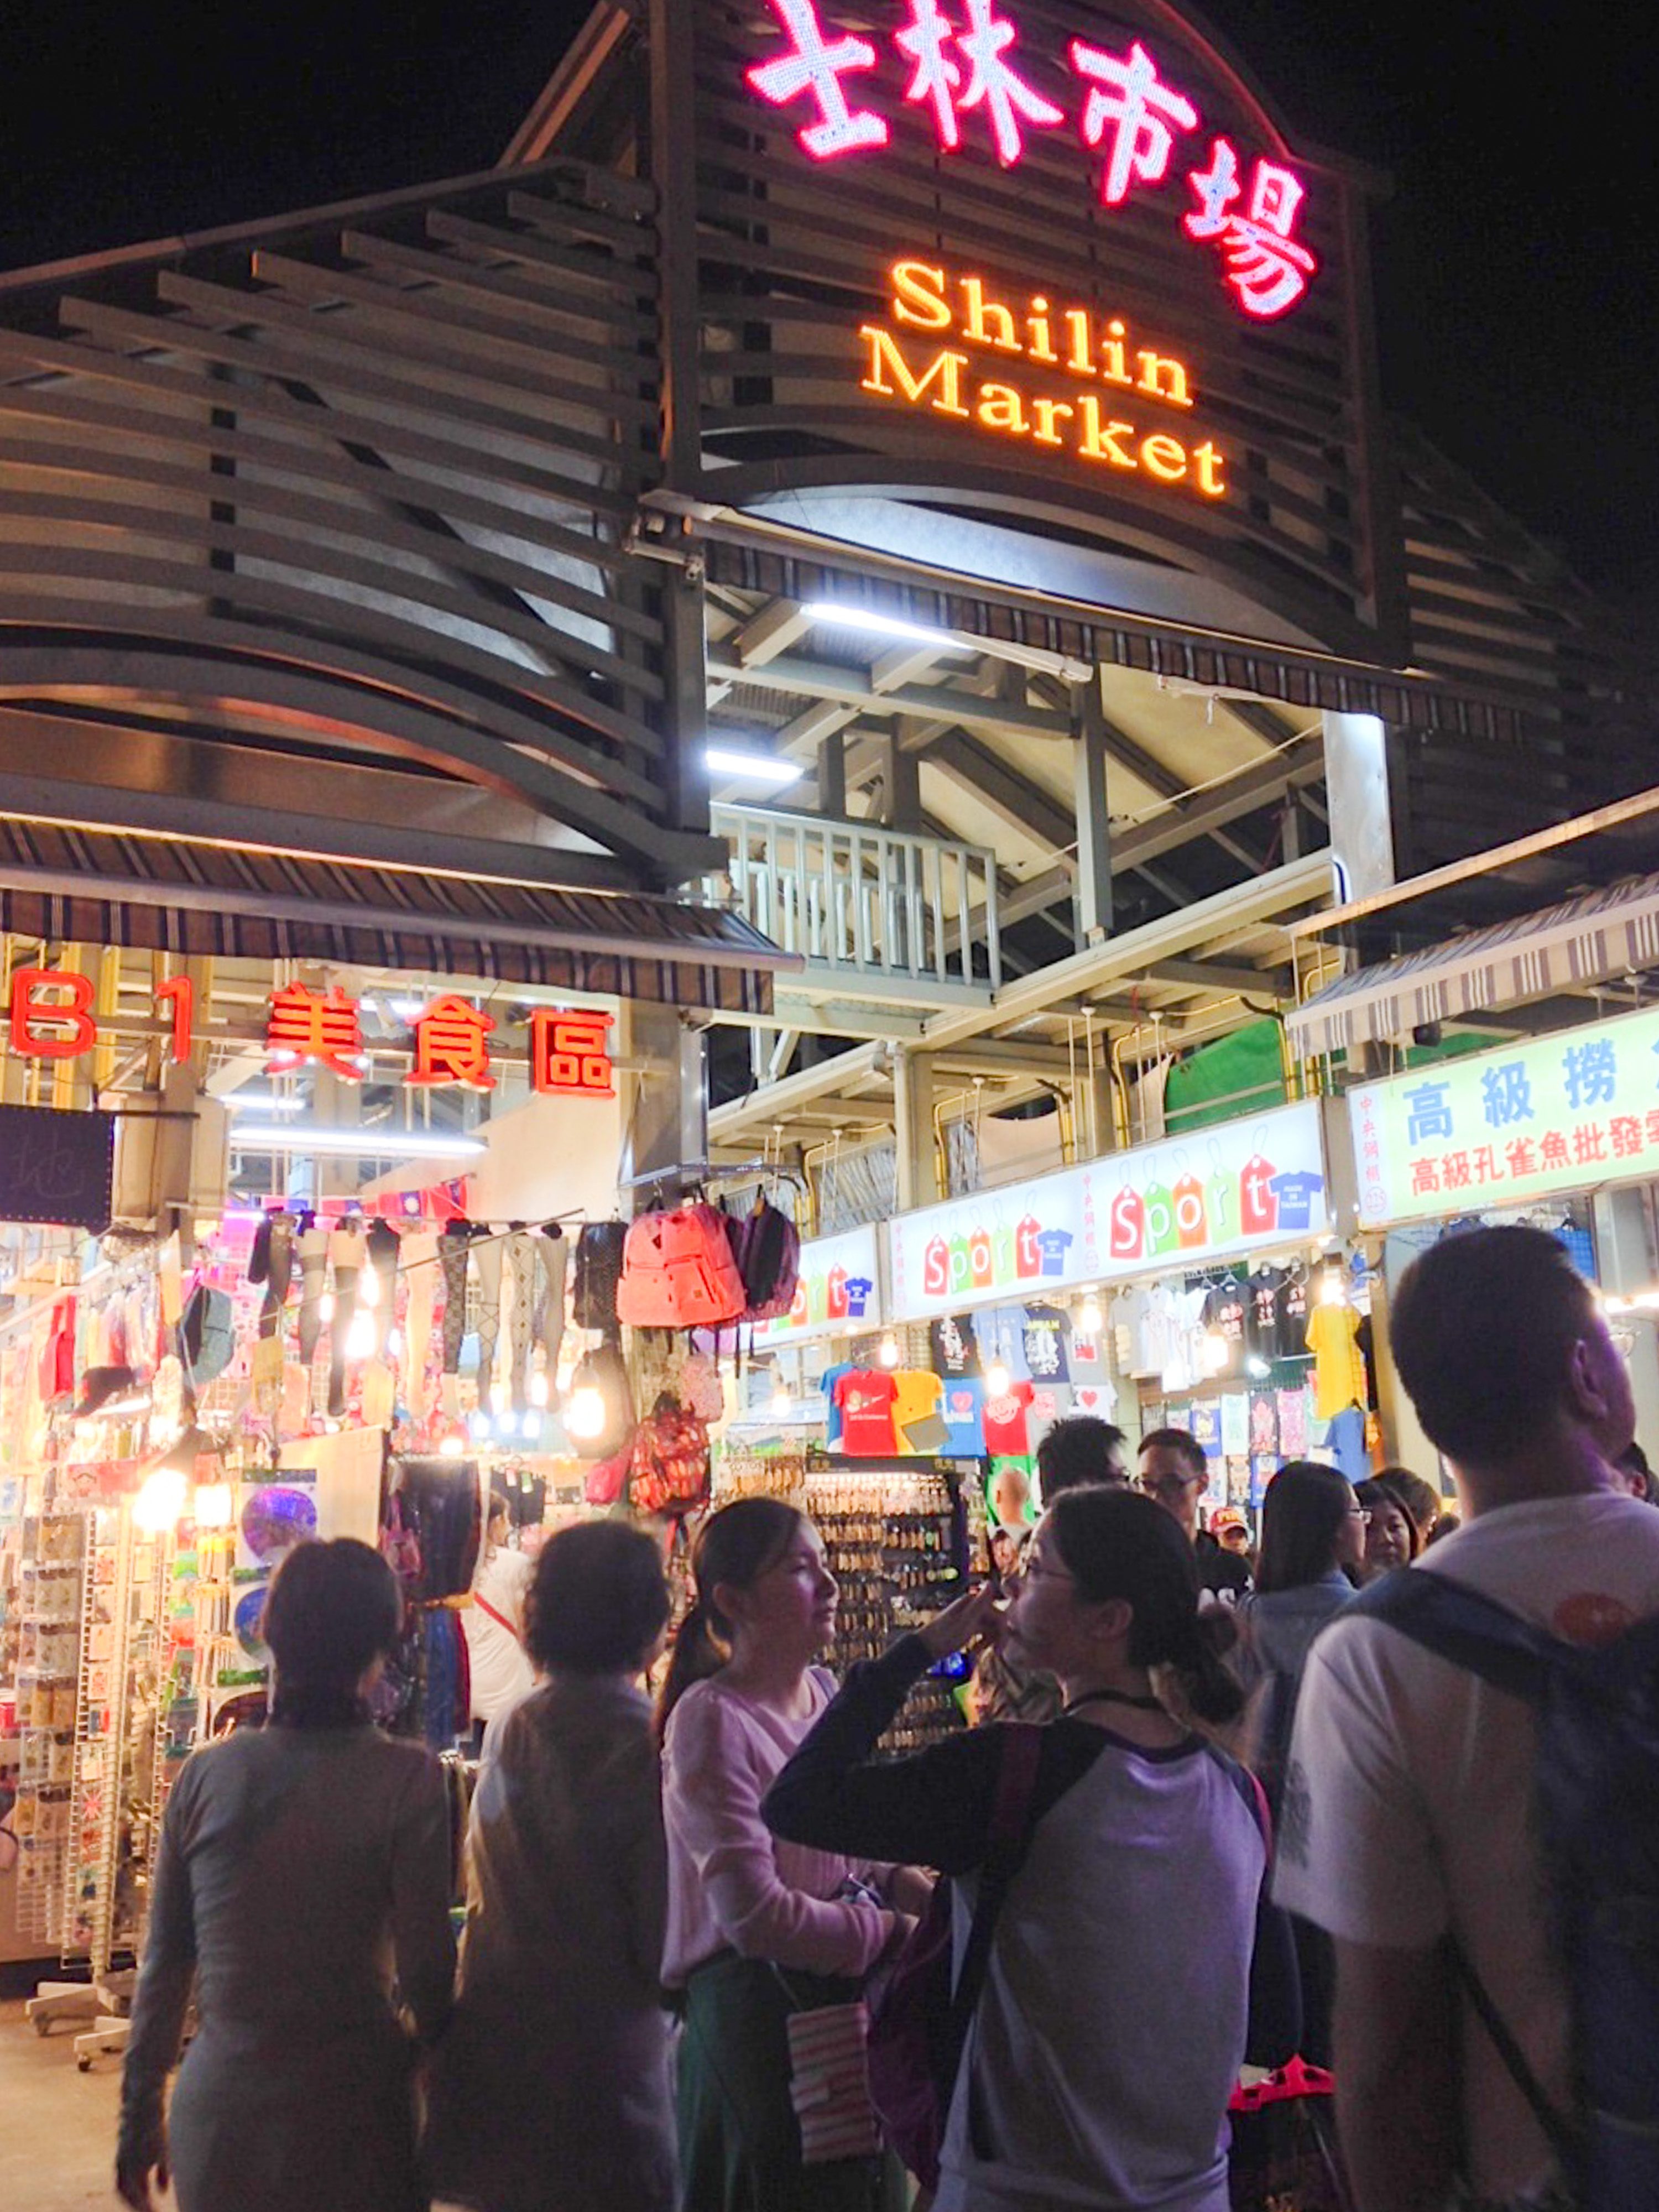 READY, SET, EAT. Get ready for a food adventure at Shilin Market  